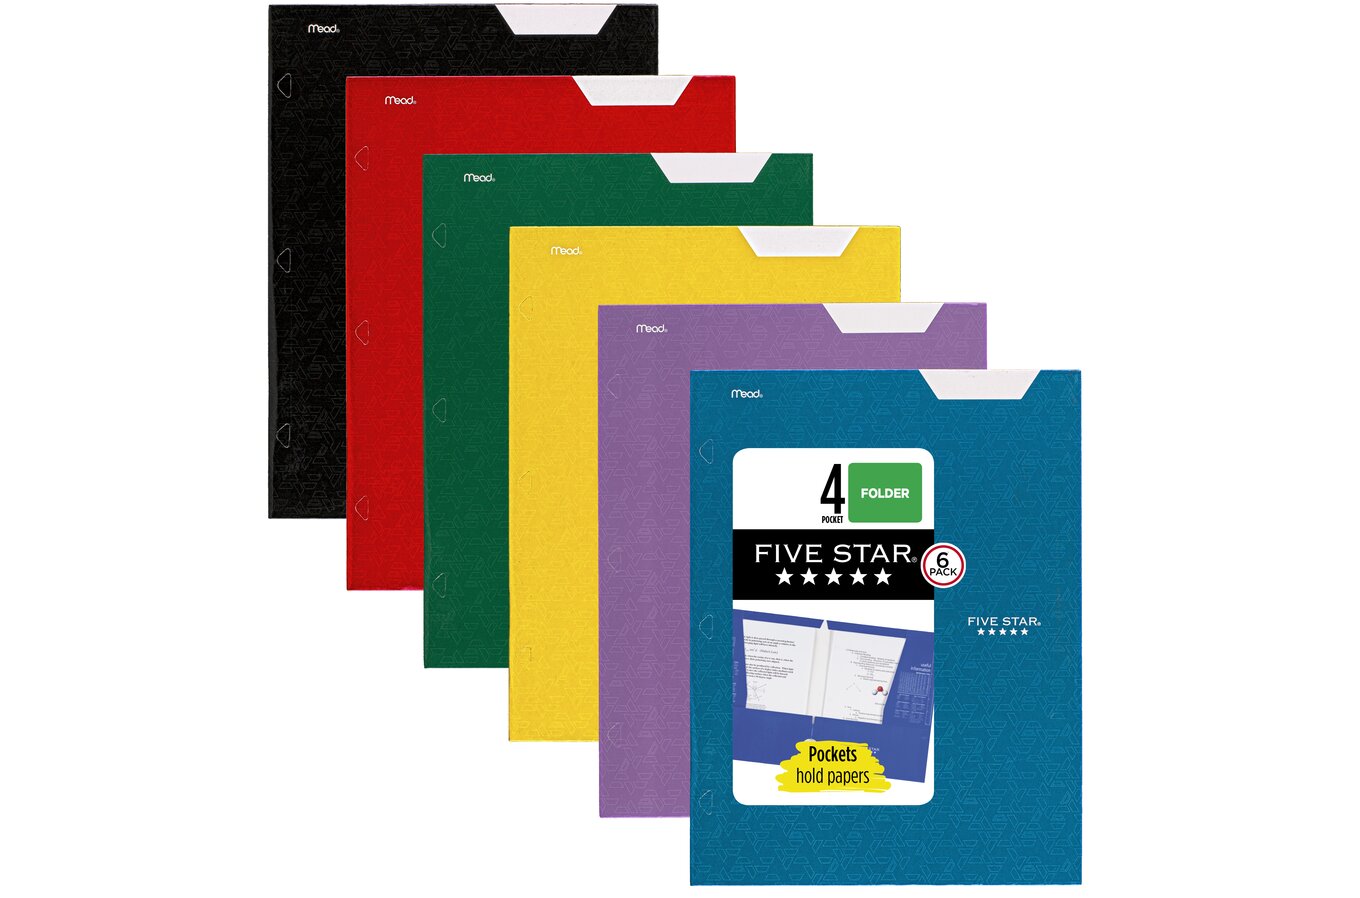 Photo Storage Pages for Four 4 x 6 Horizontal Photos, 3-Hole Punched,  10/Pack - Supply Solutions